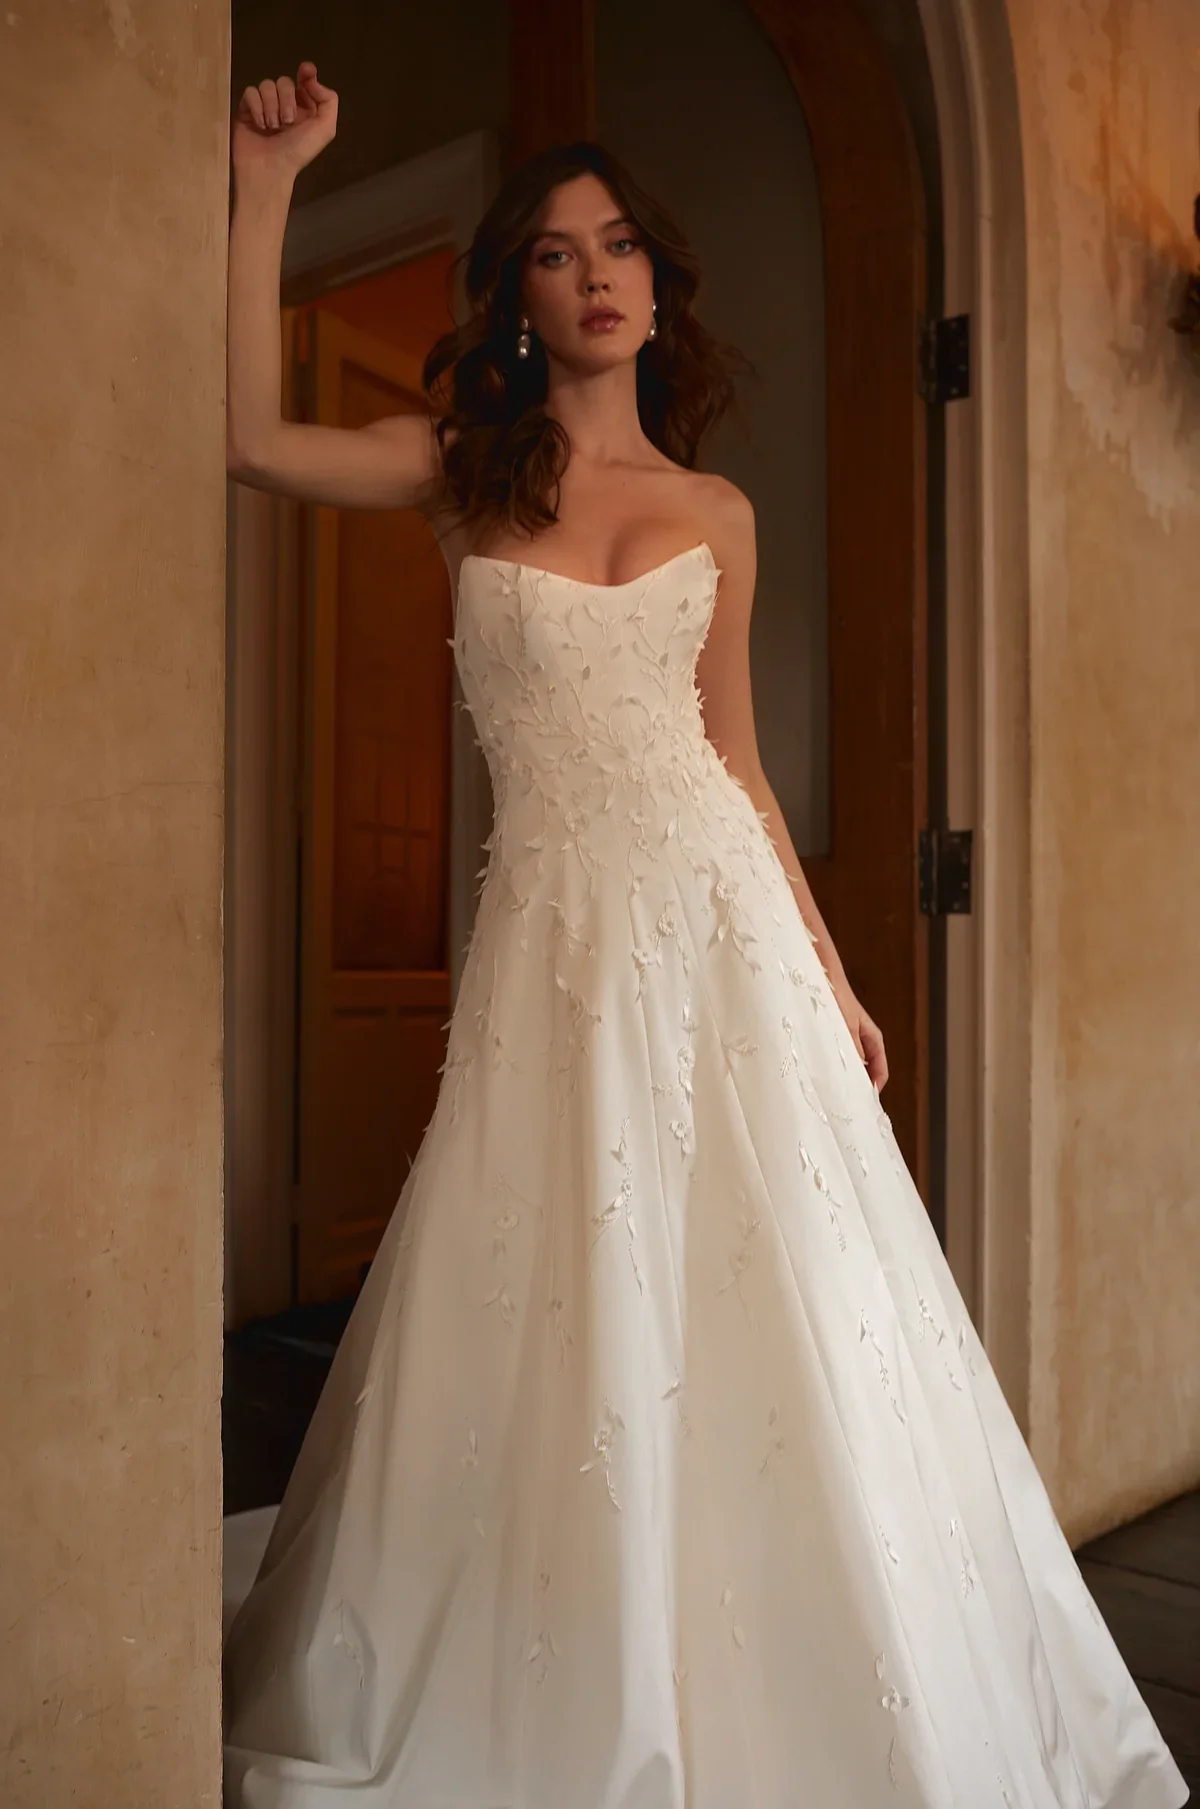 Classic Sweetheart Strapless Gown by Enaura Bridal - Image 1